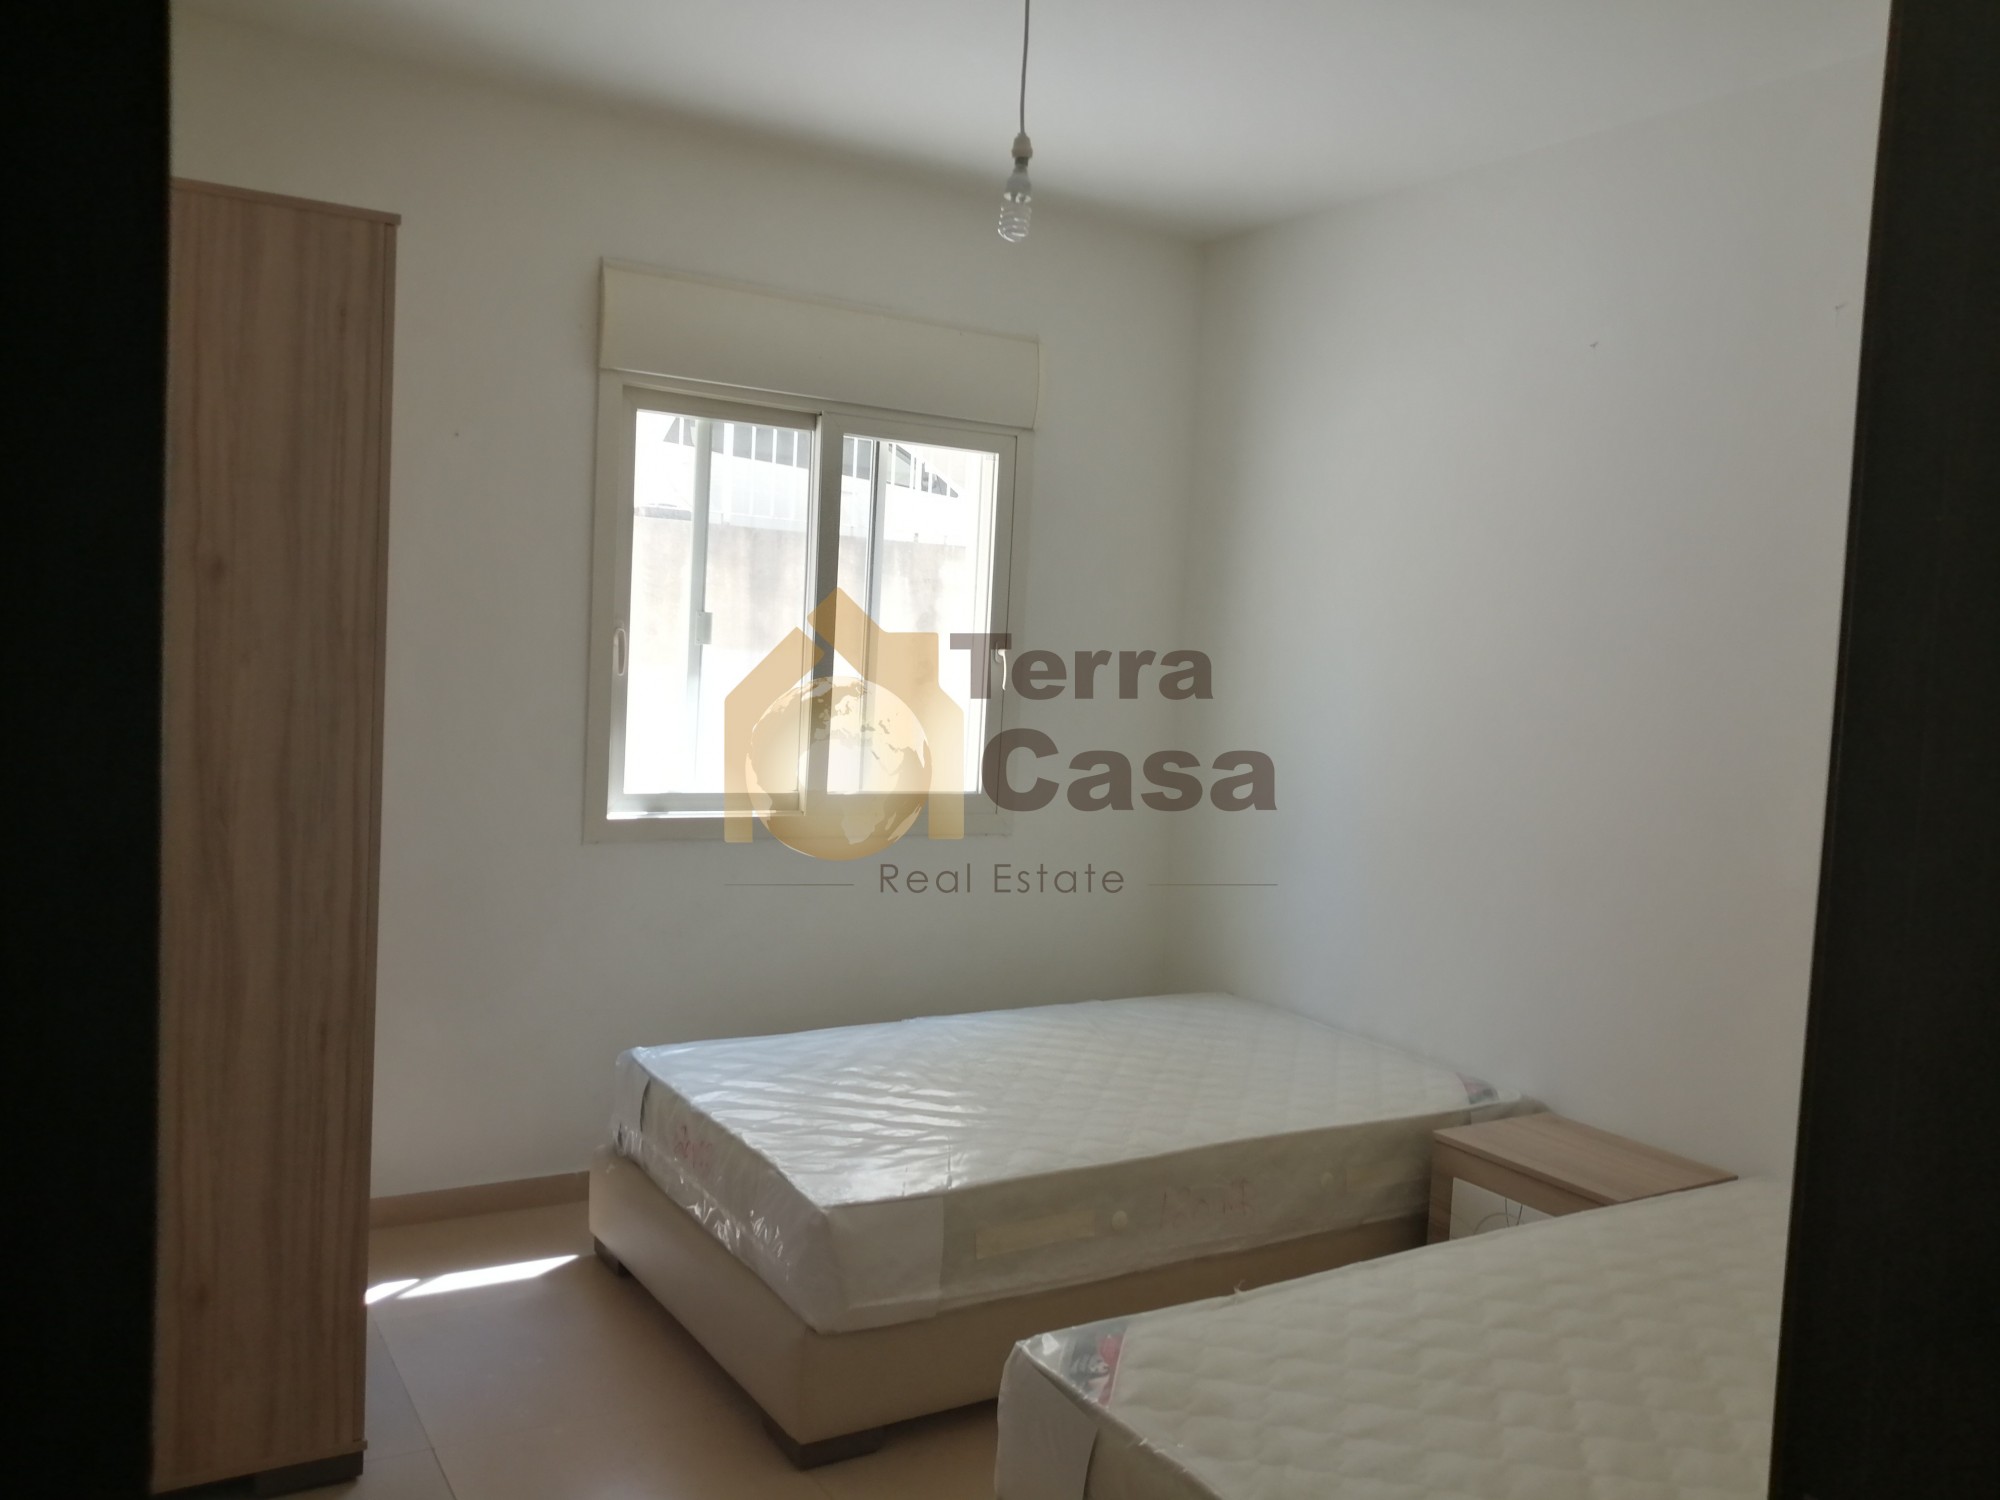 Apartment for sale in kfarhbab brand new with terrace and garden.